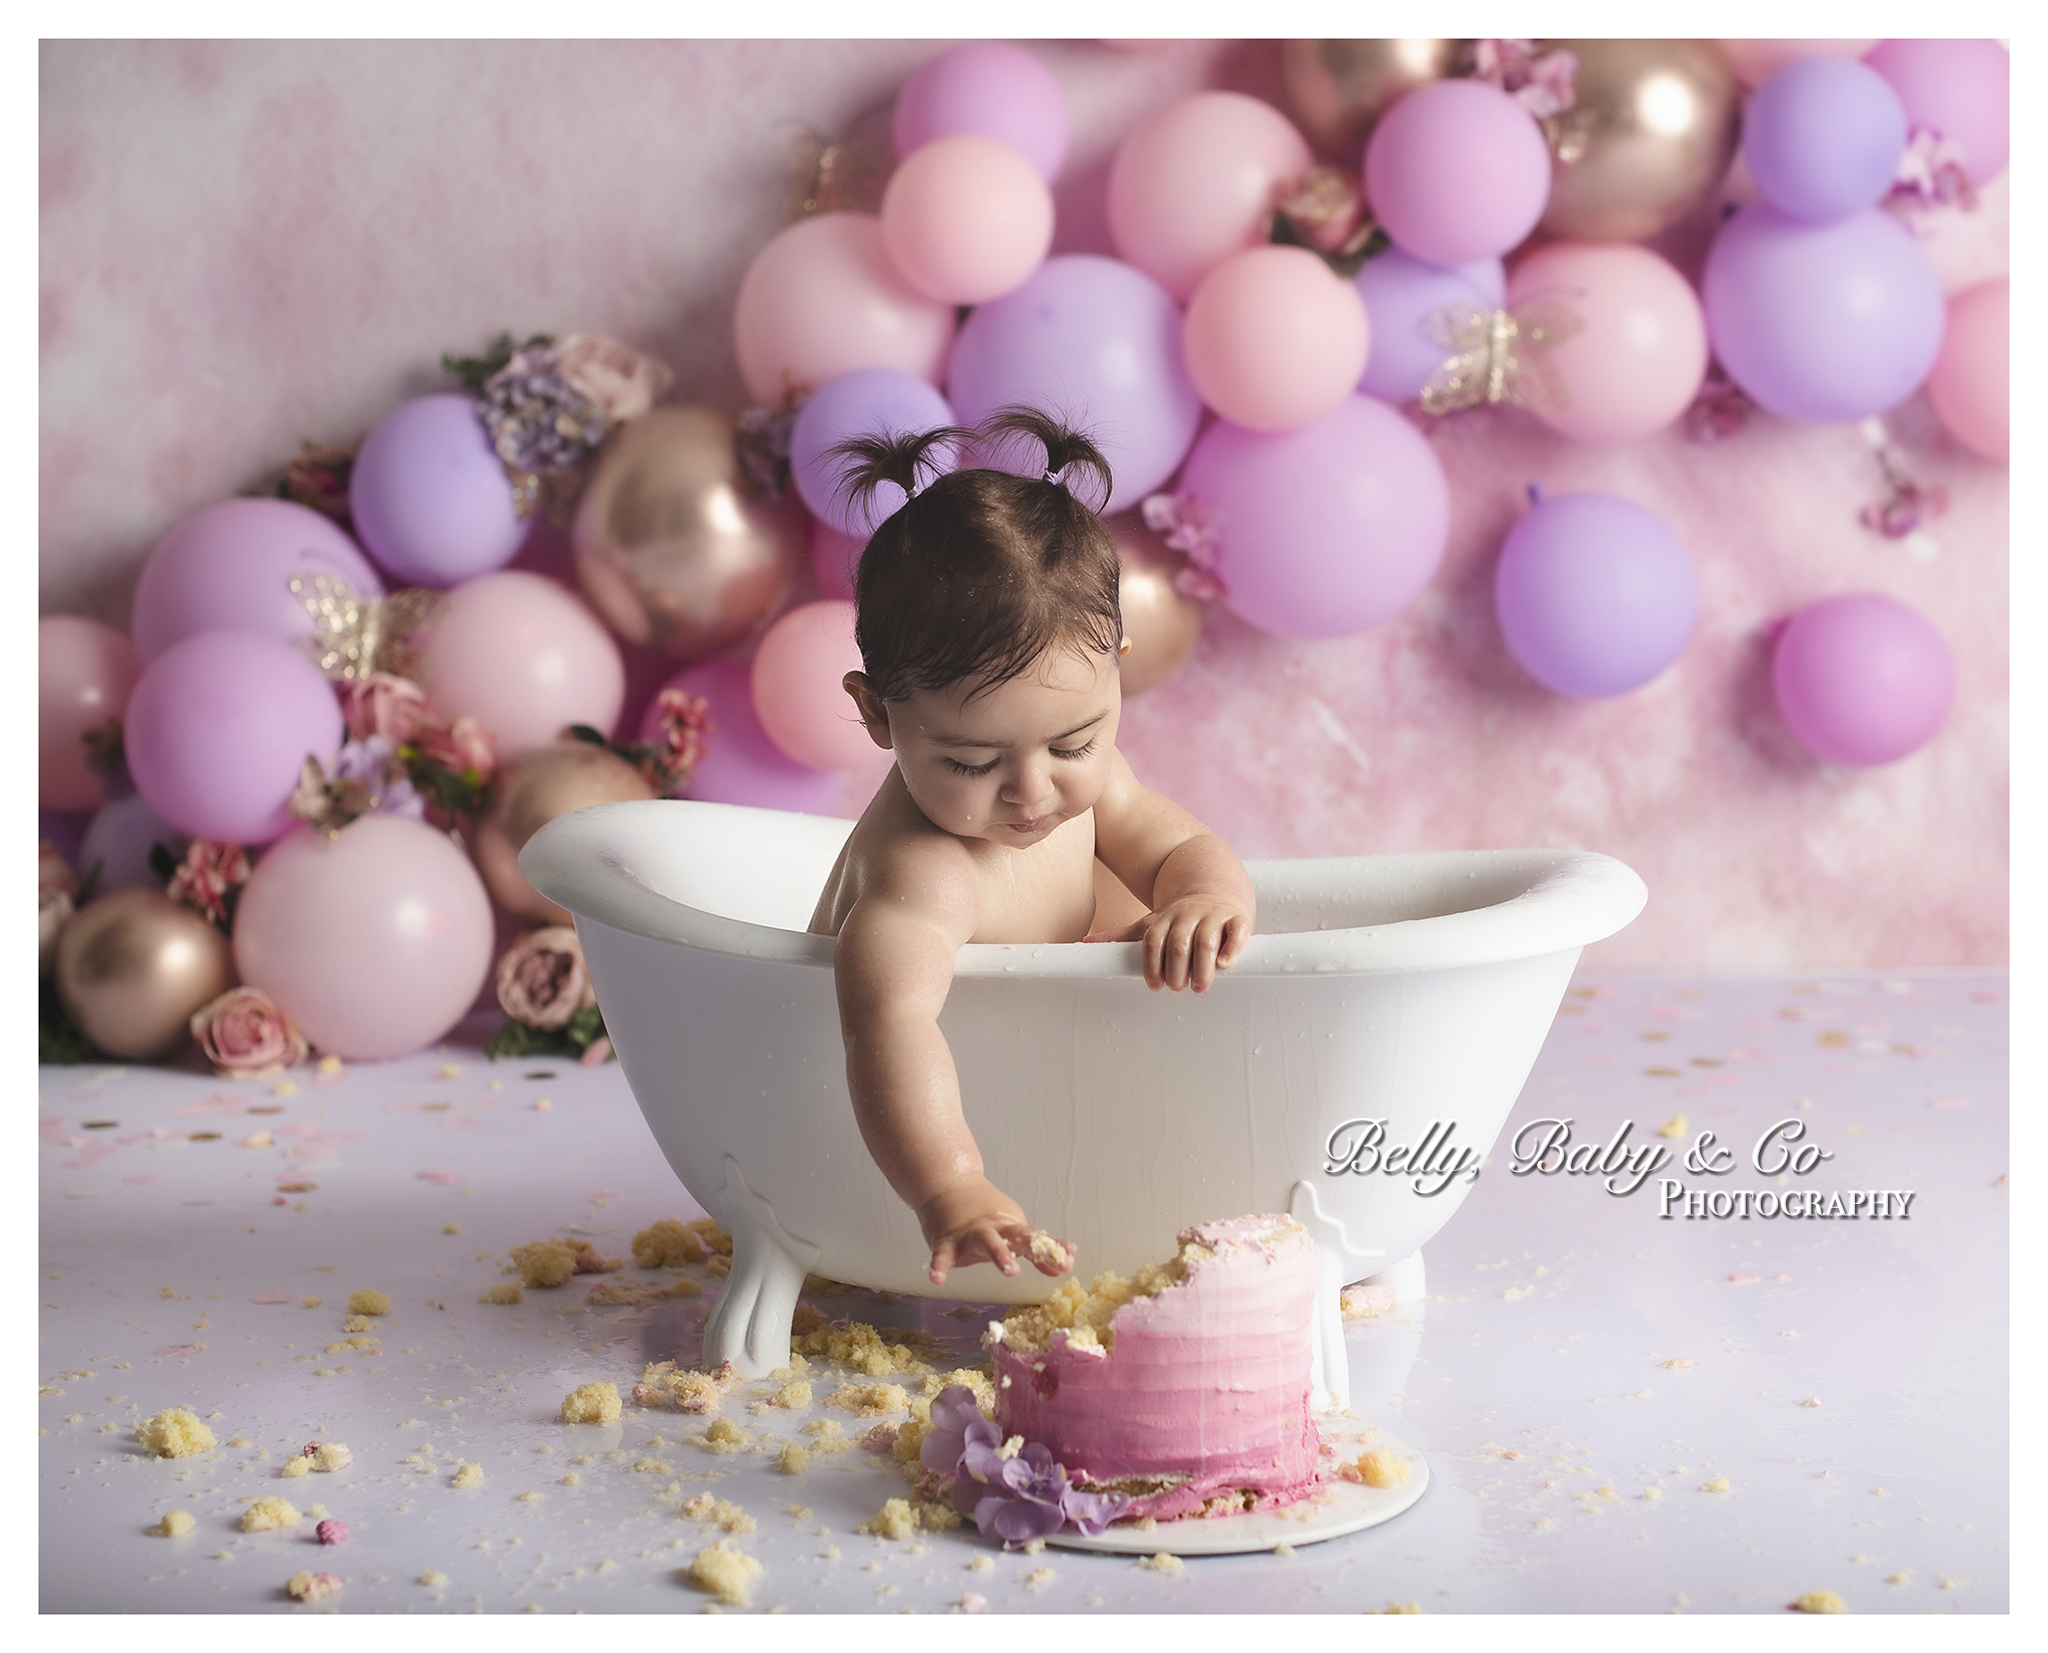 Belly-Baby-Co-Photography-1 Top 10 Best Cake Smash Photographers in the World